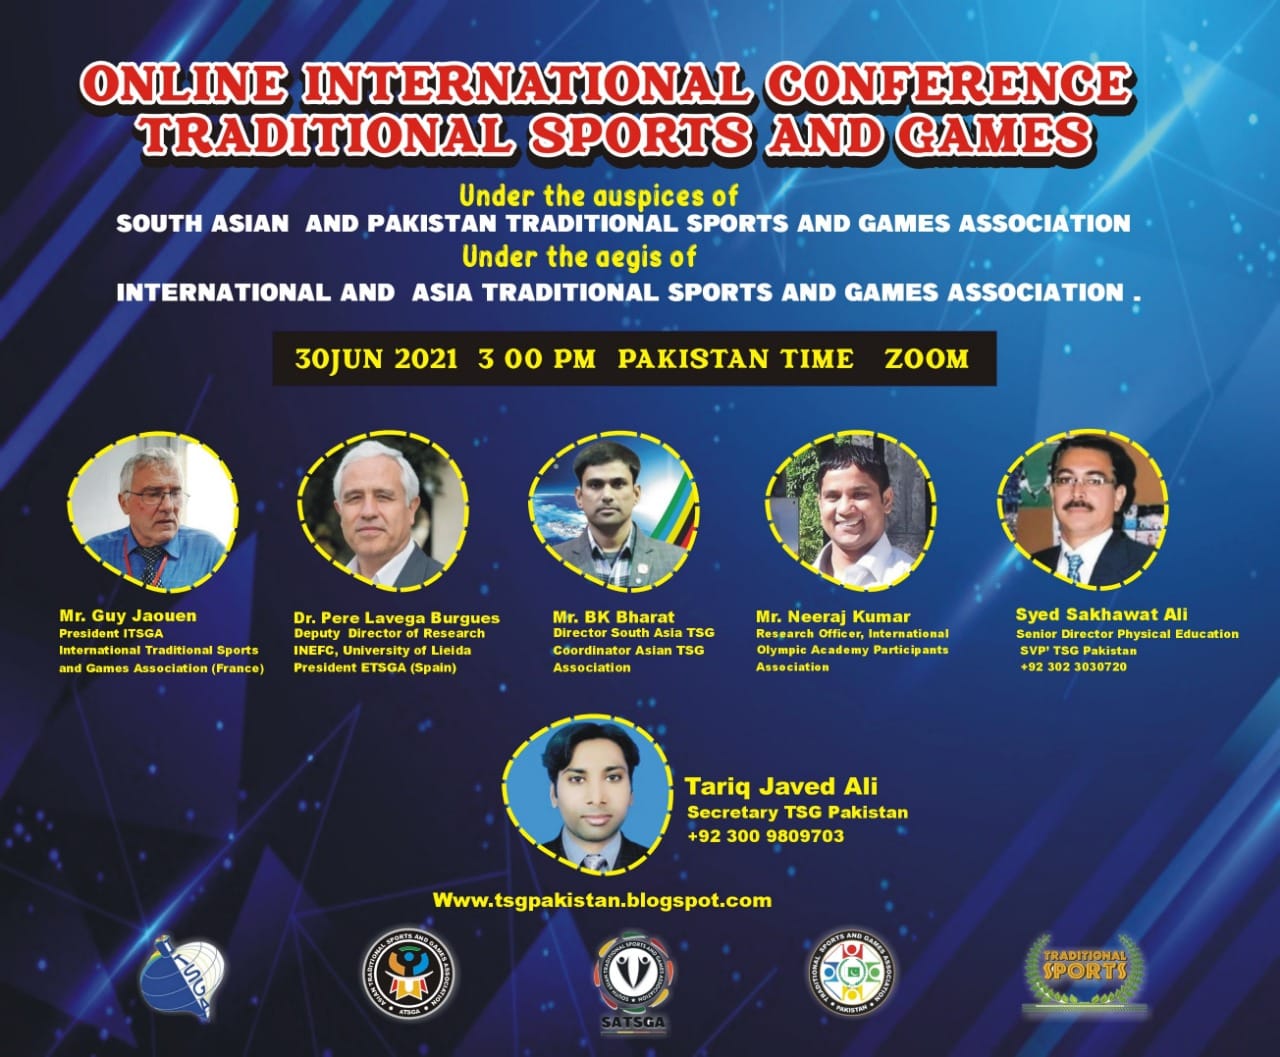 Online International Conference on Traditional Sports and Games